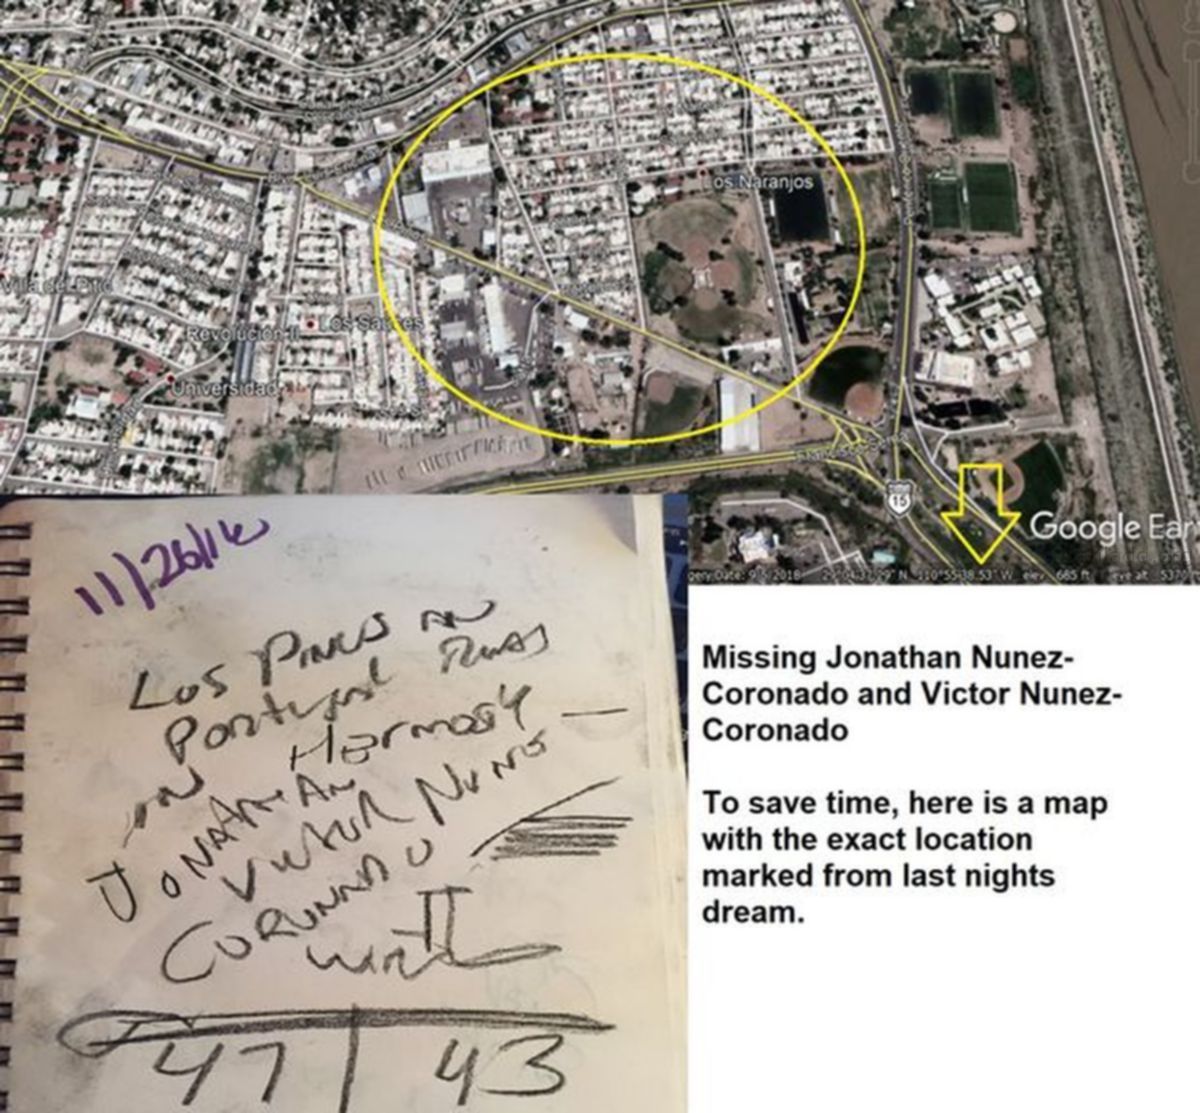 Missing Jonathan Nunez Coronado And Victor Nunez Coronado - Missing Jonathan Nunez-Coronado And Victor Nunez-Coronado  T...
Missing Jonathan Nunez-Coronado And Victor Nunez-Coronado  To Save Time, Here Is A Map With The Exact Location Marked From Last Nights Dream.
